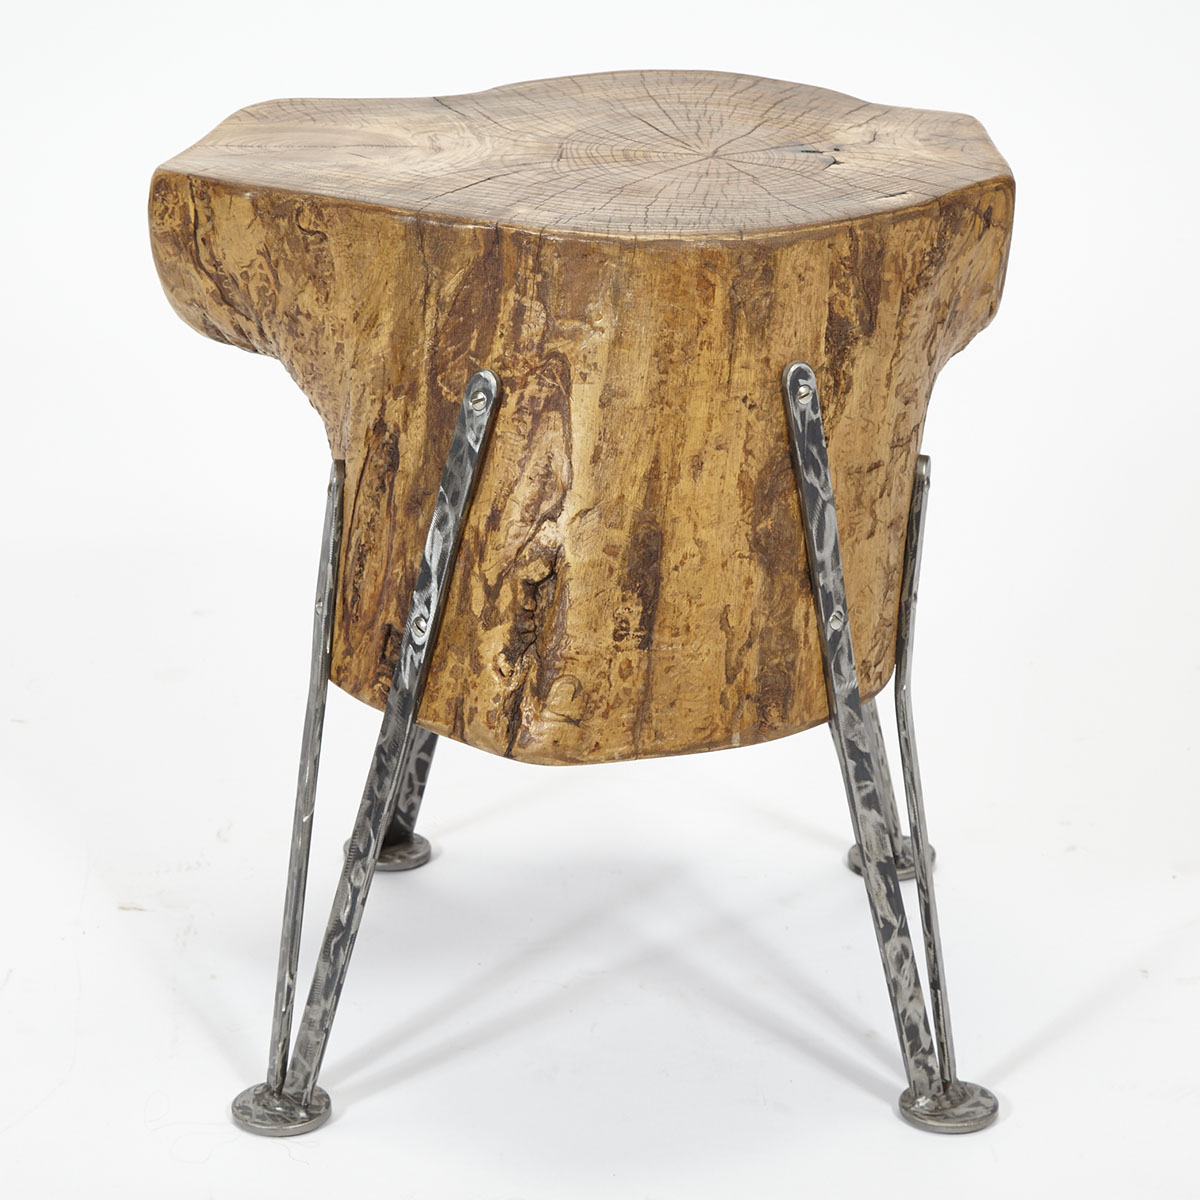 Contemporary Oak Free Edge Log Table/ Stool on Wrought Iron Stand